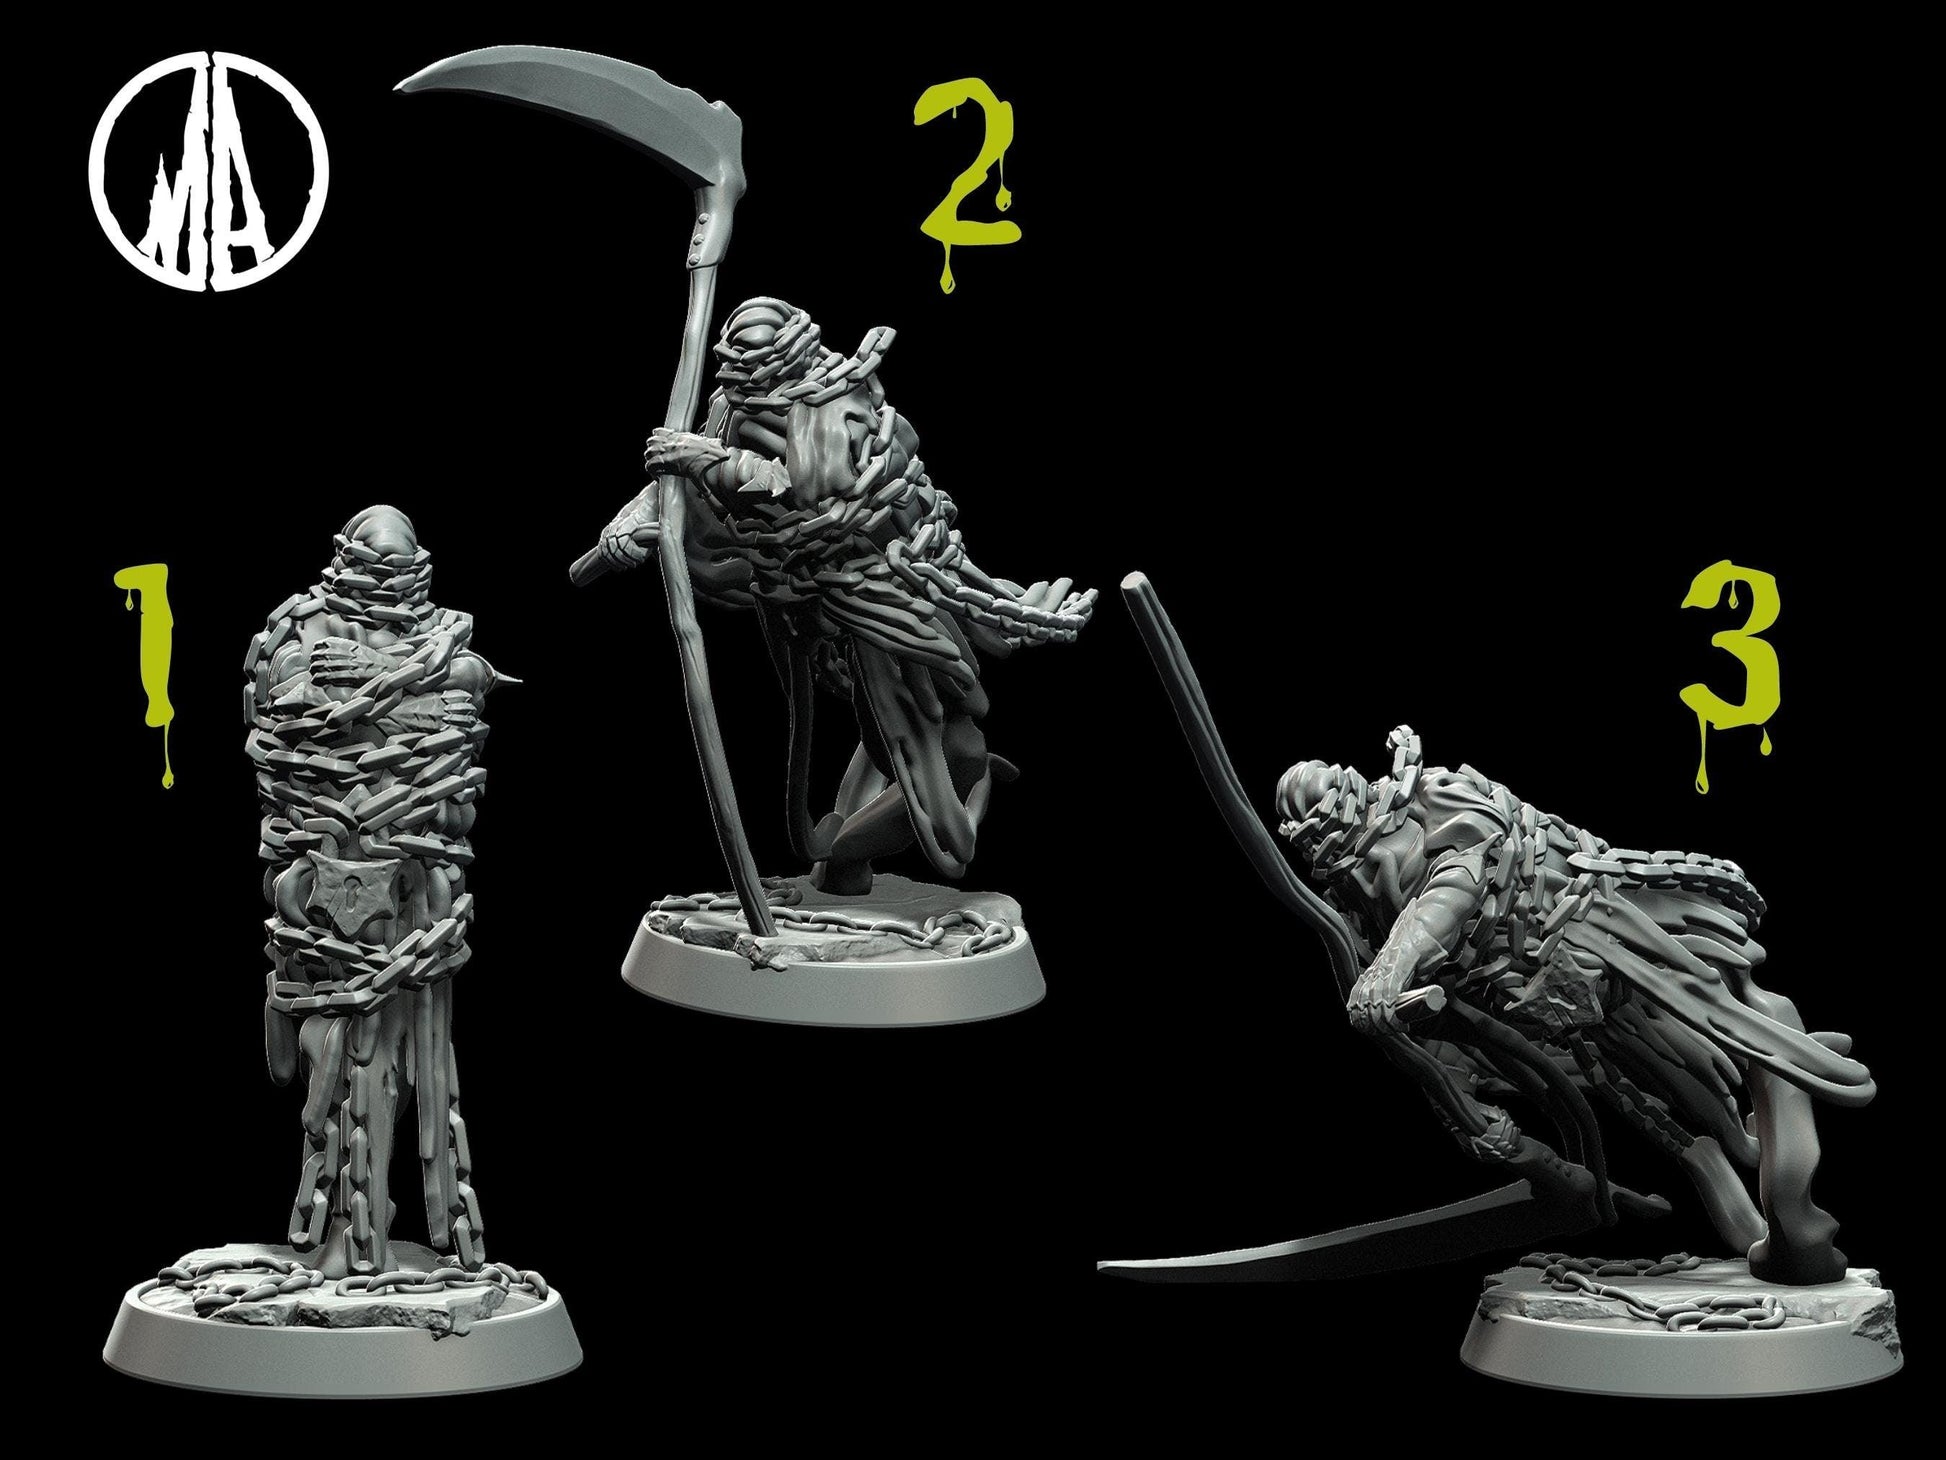 Imprisoned Soul Miniature skeleton miniature - 3 Poses - 28mm scale Tabletop gaming DnD Miniature Dungeons and Dragons dnd 5e - Plague Miniatures shop for DnD Miniatures